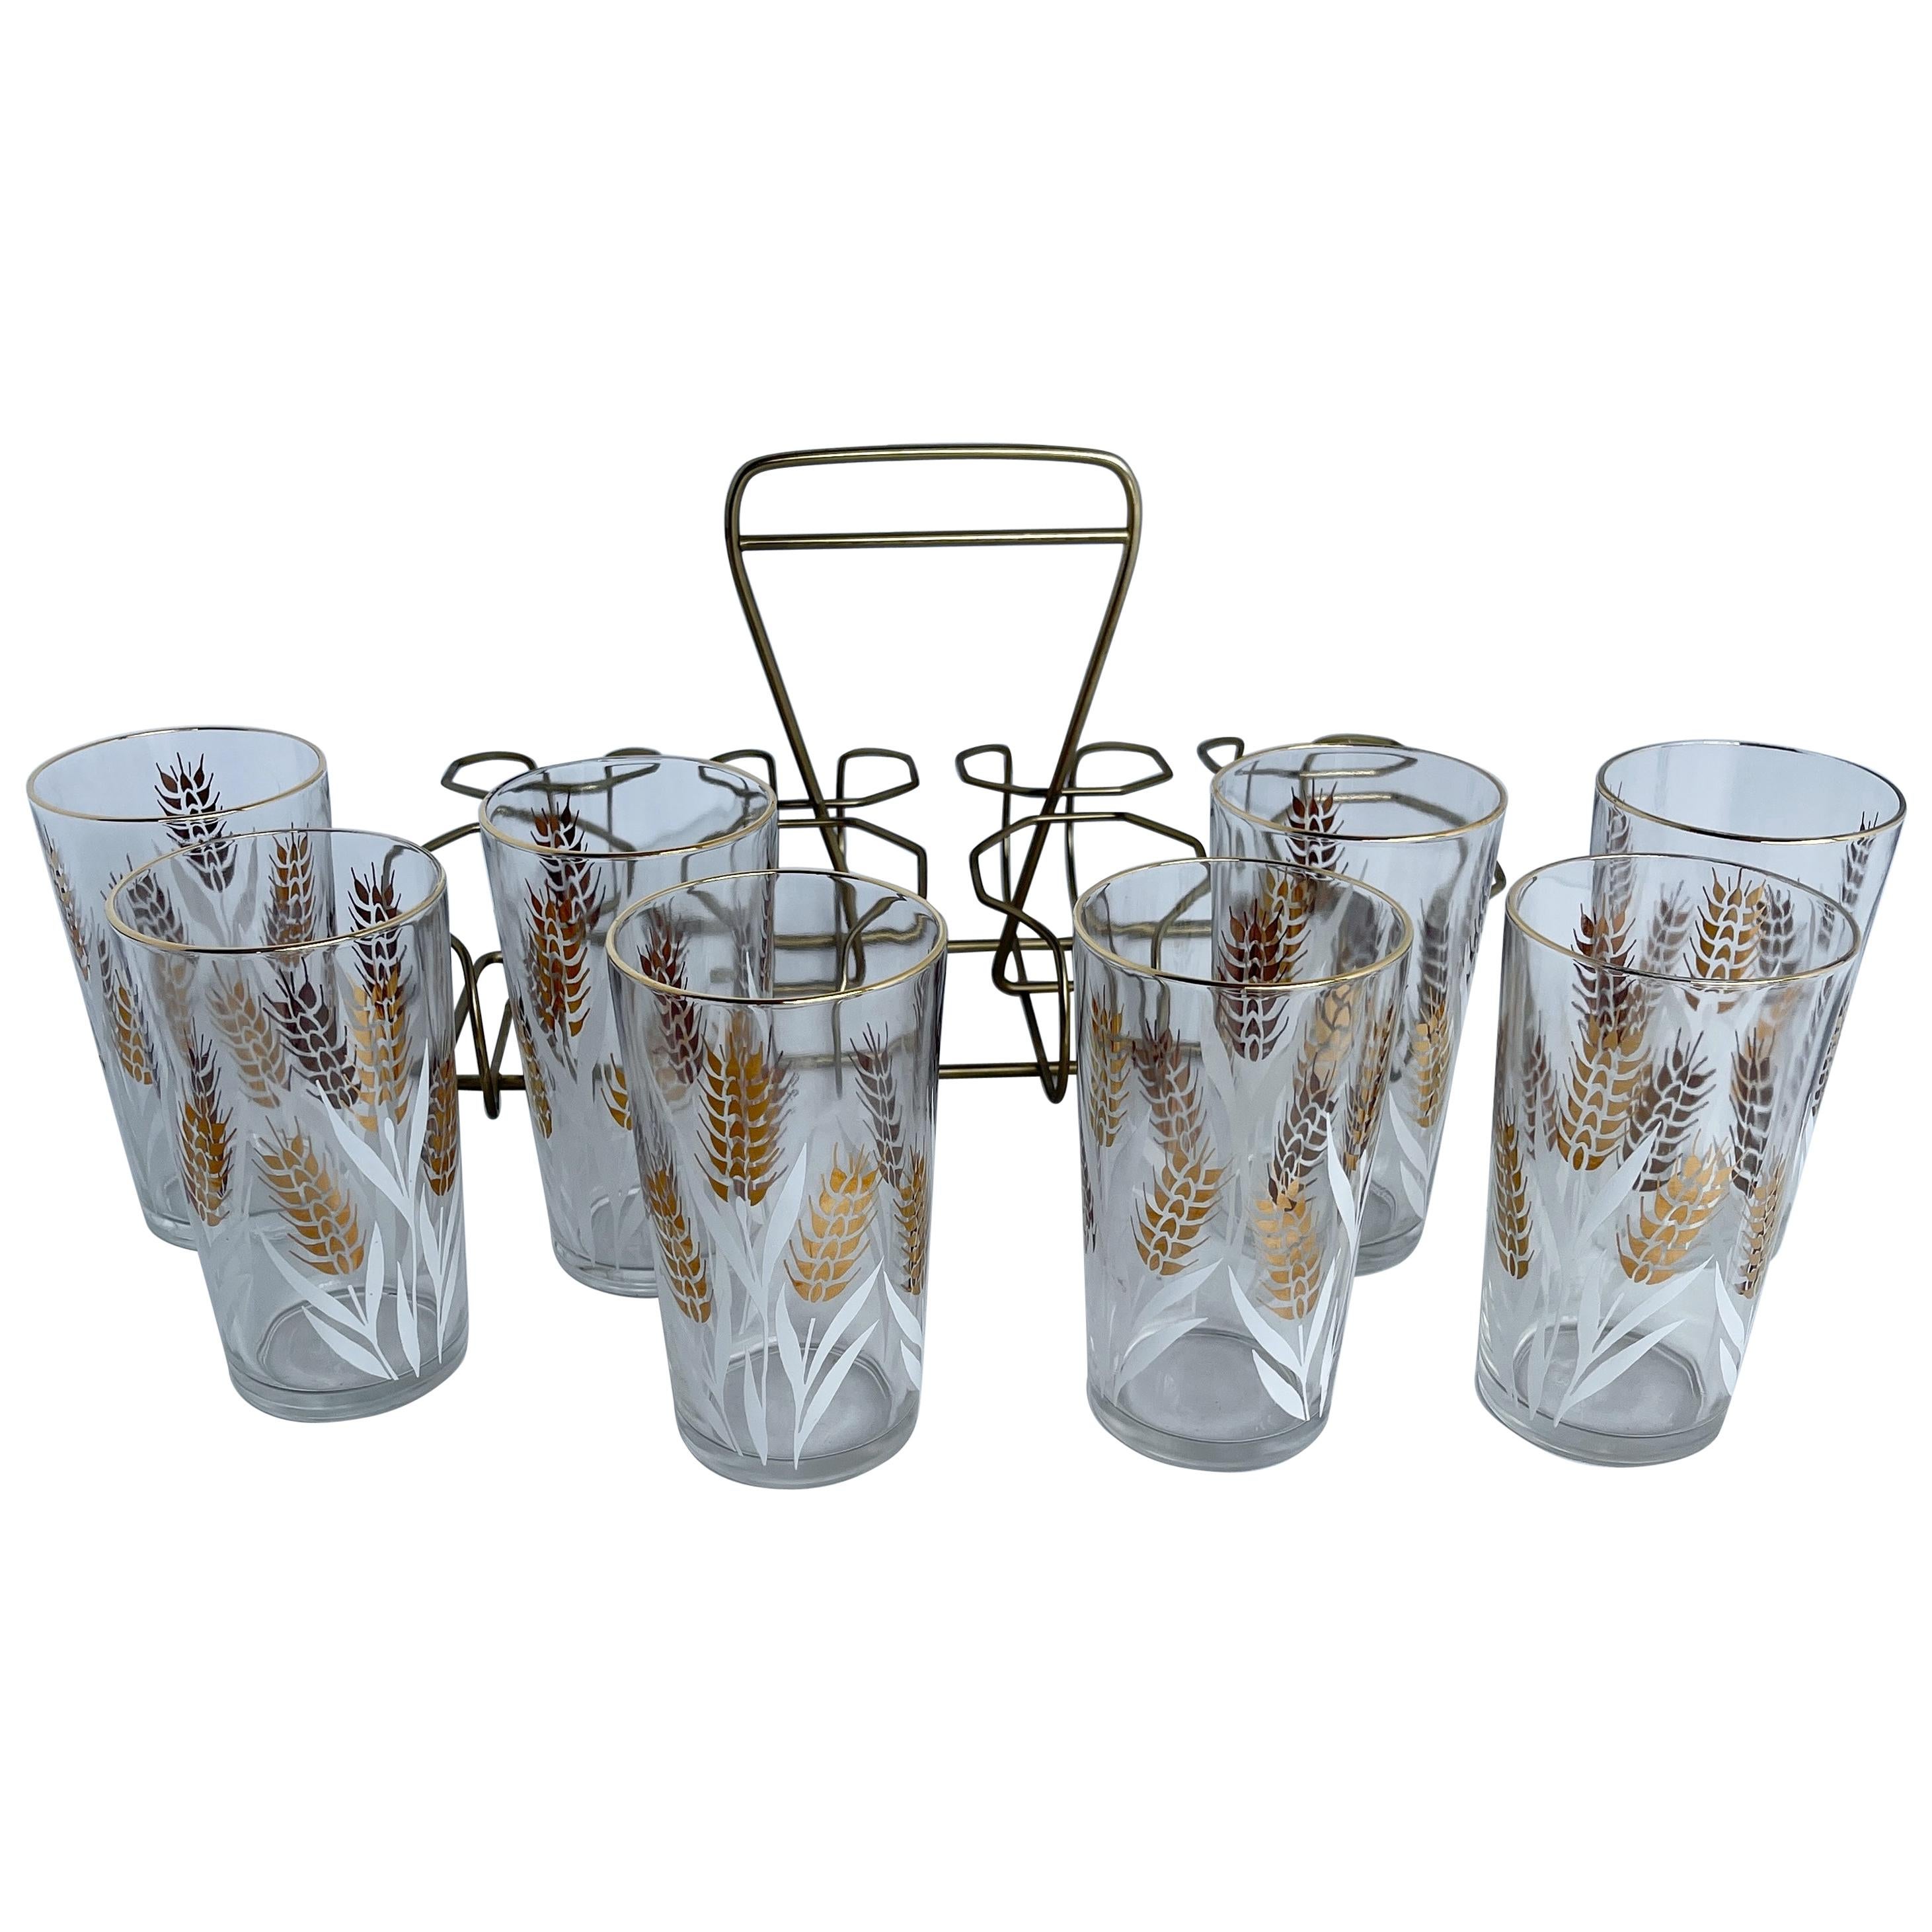 Mid-Century Modern Set of 8 Highball Glasses with Brass Caddy